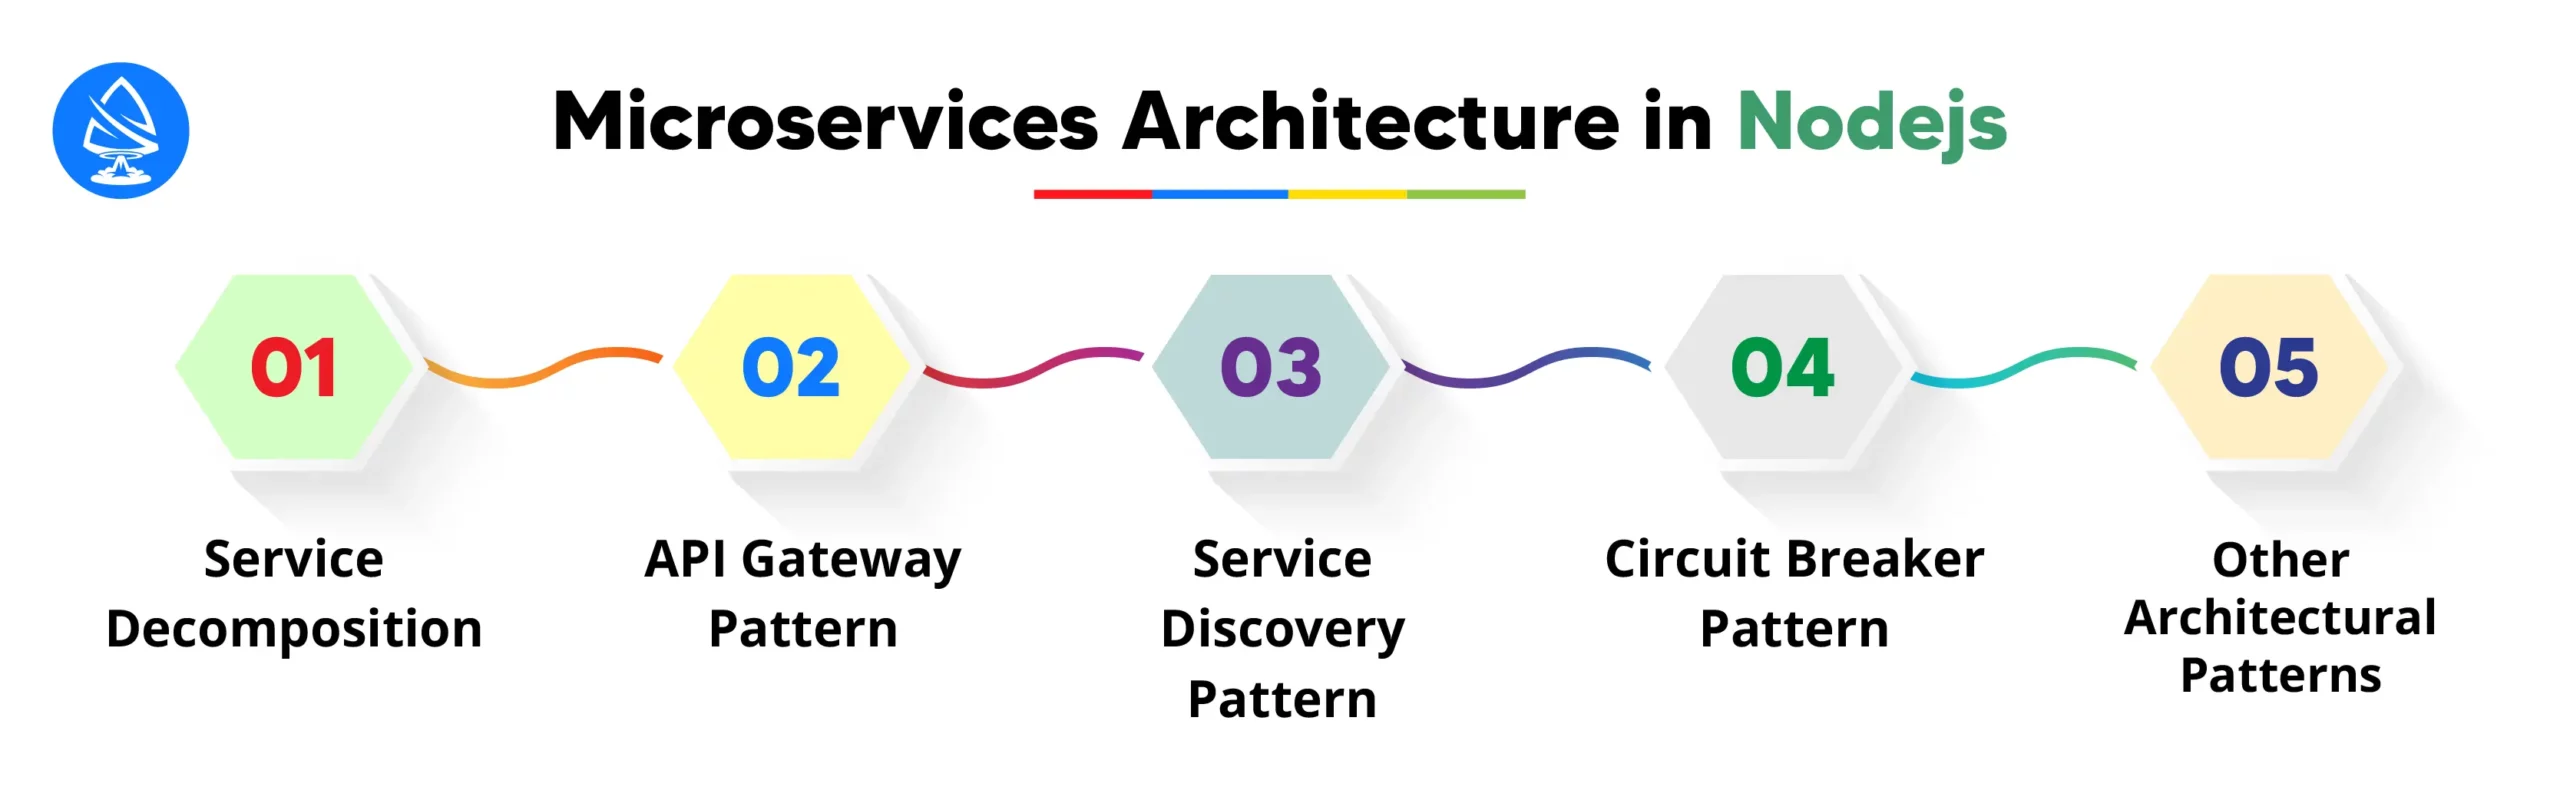 Microservices Architecture in NodeJS 